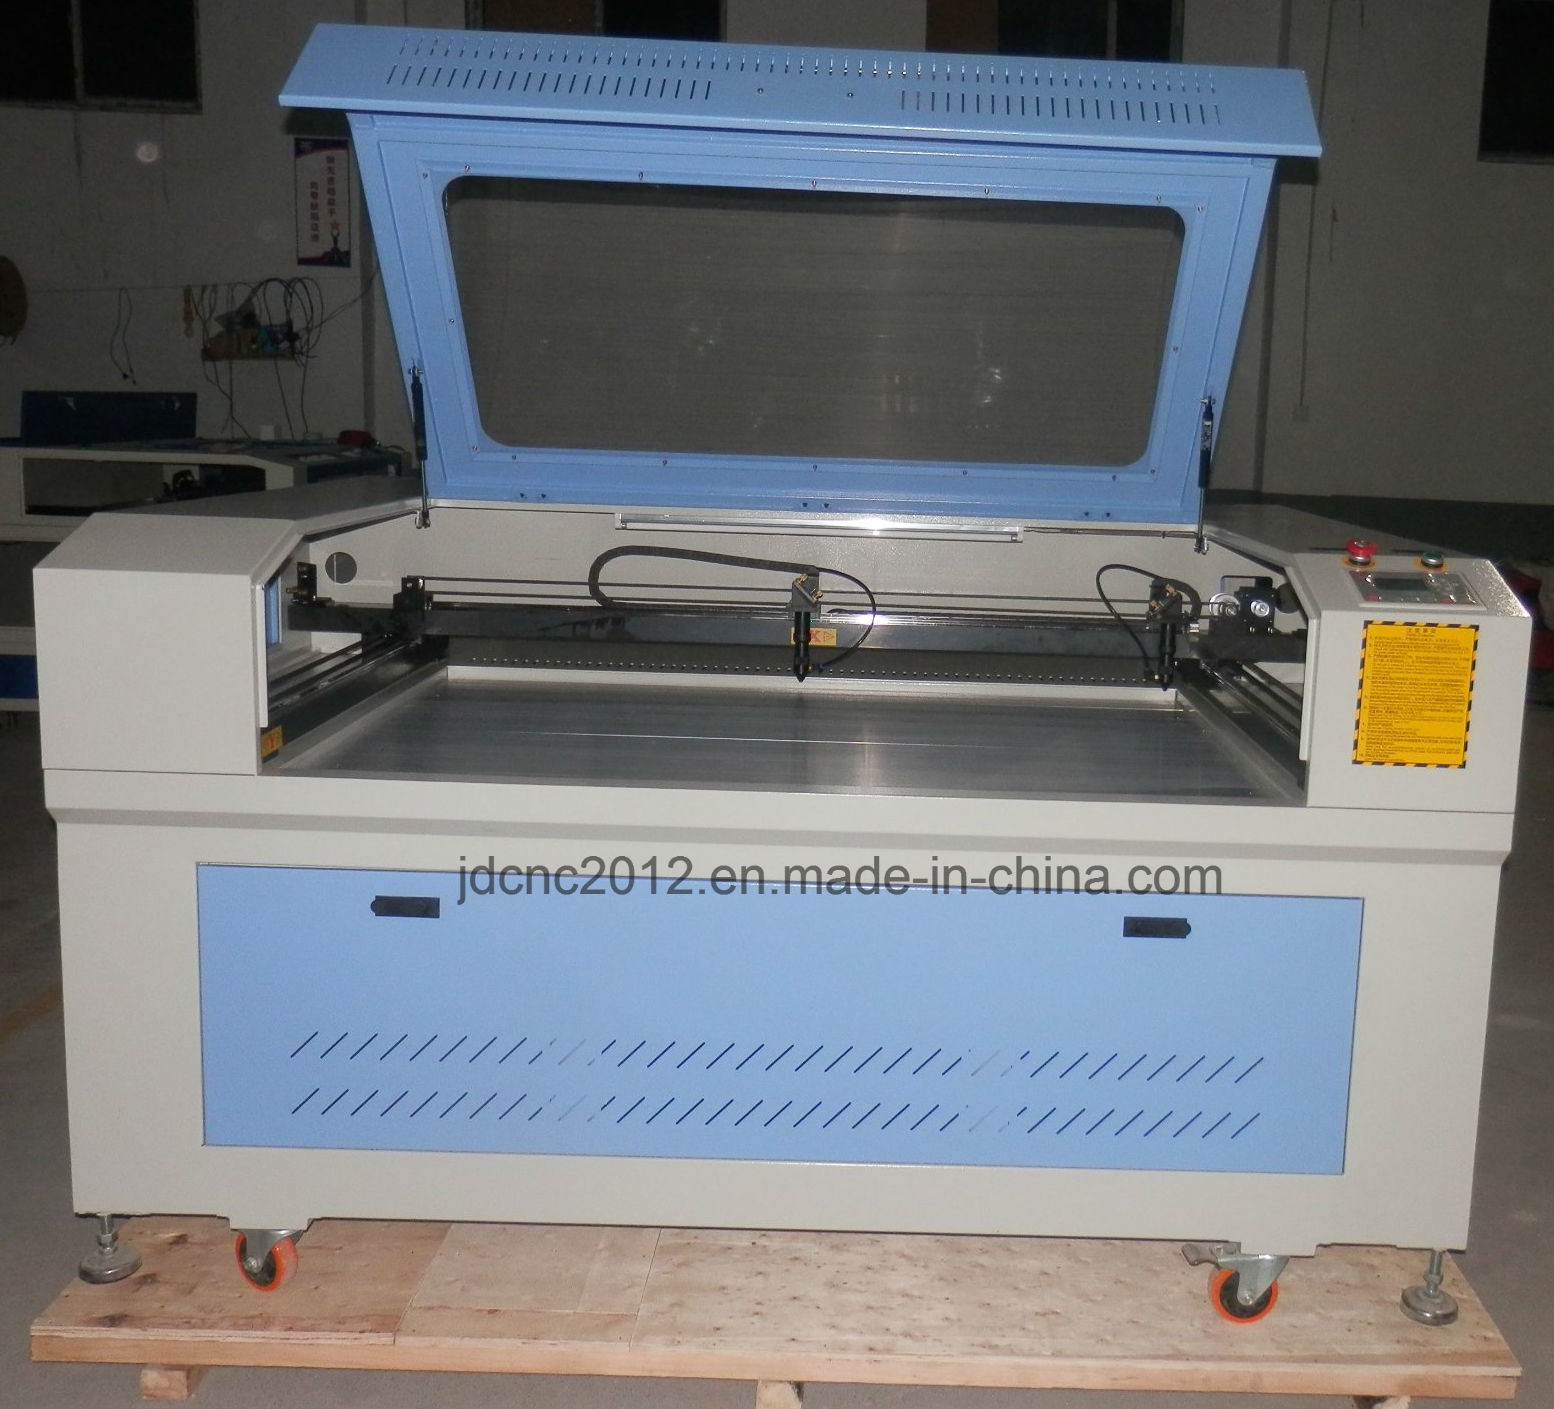 Cheap CO2 Laser Machine for Engraving and Cutting